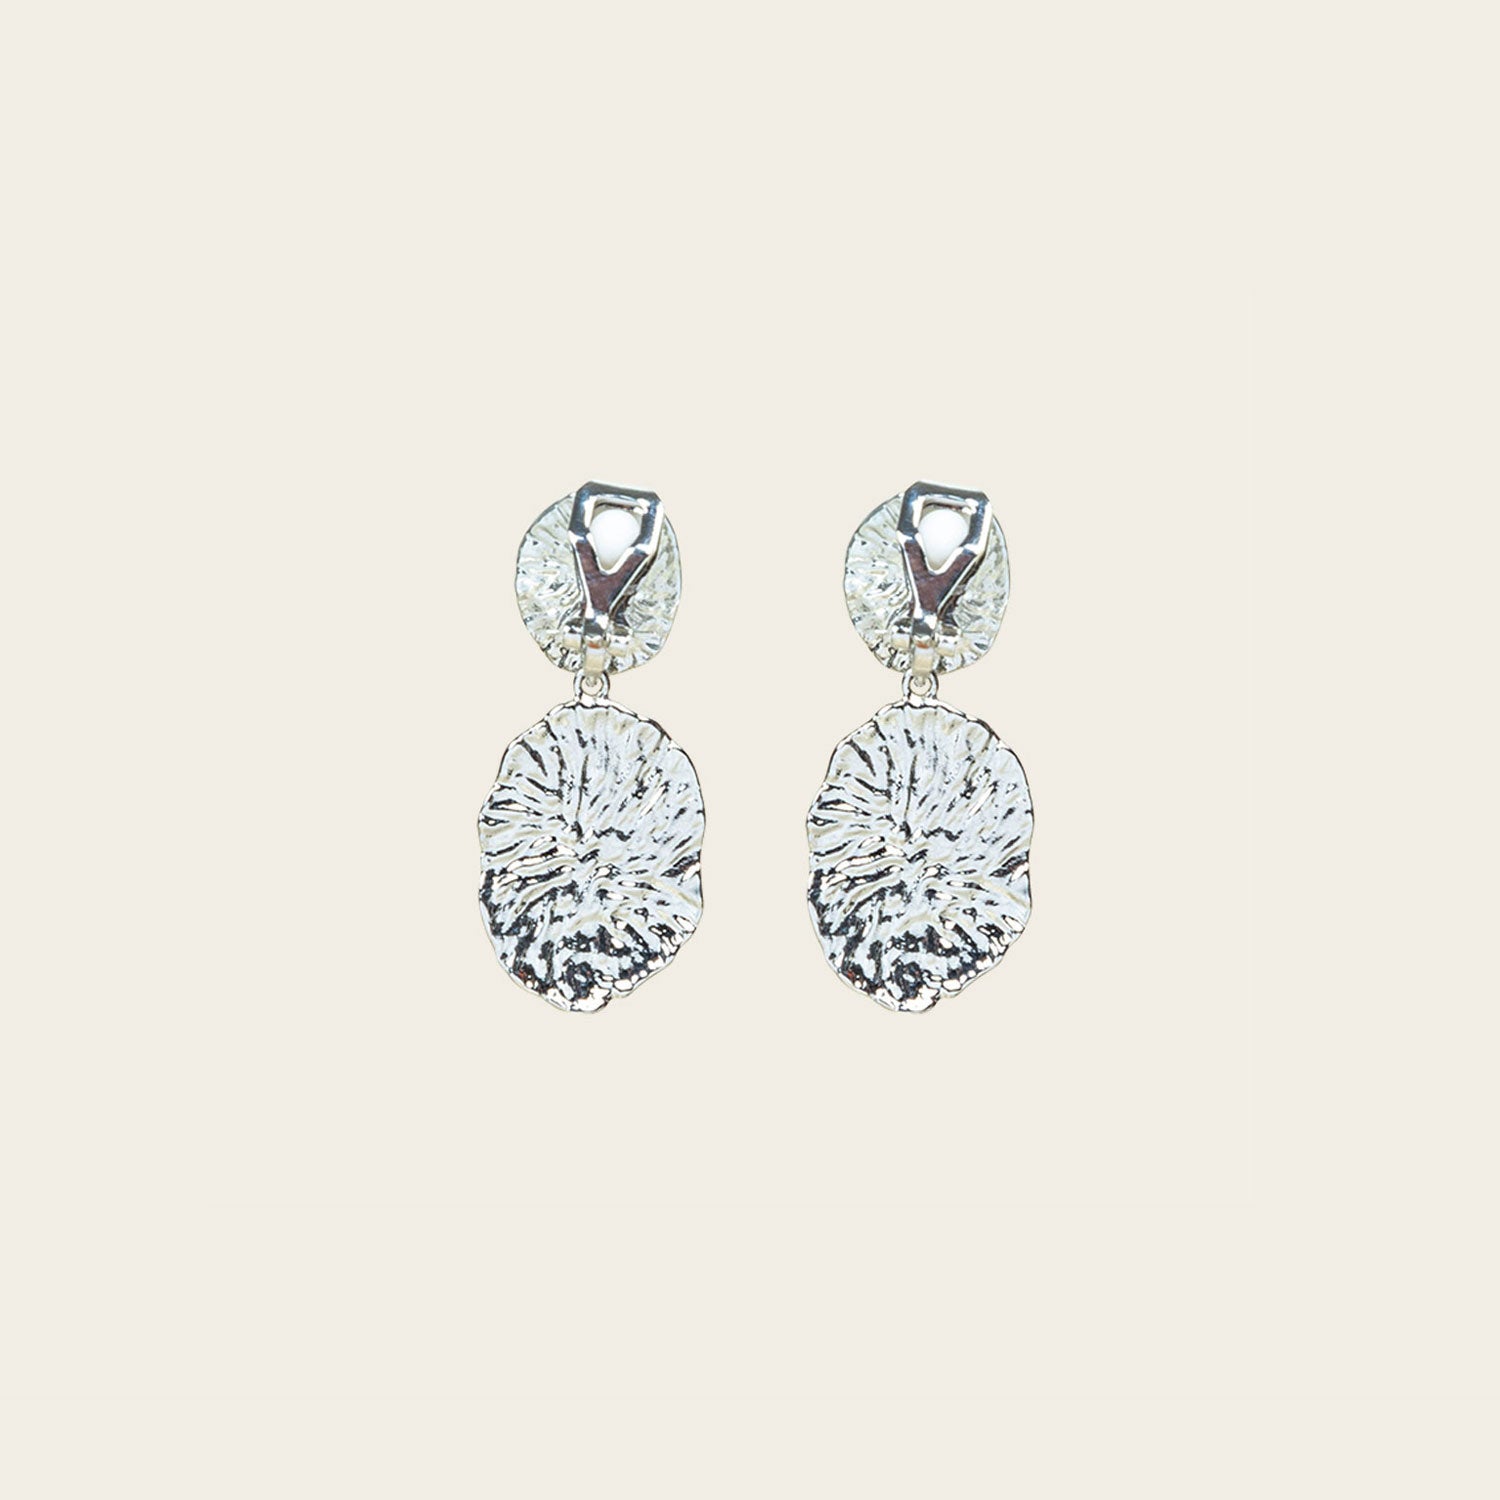 Image of the Daiquiri Drop Clip On Earrings in Silver feature a secure, padded clip-on closure ideal for all ear types, offering up to 12 hours of comfortable wear. Crafted from Zinc and Copper alloy, these earrings come as a single pair with removable rubber padding.